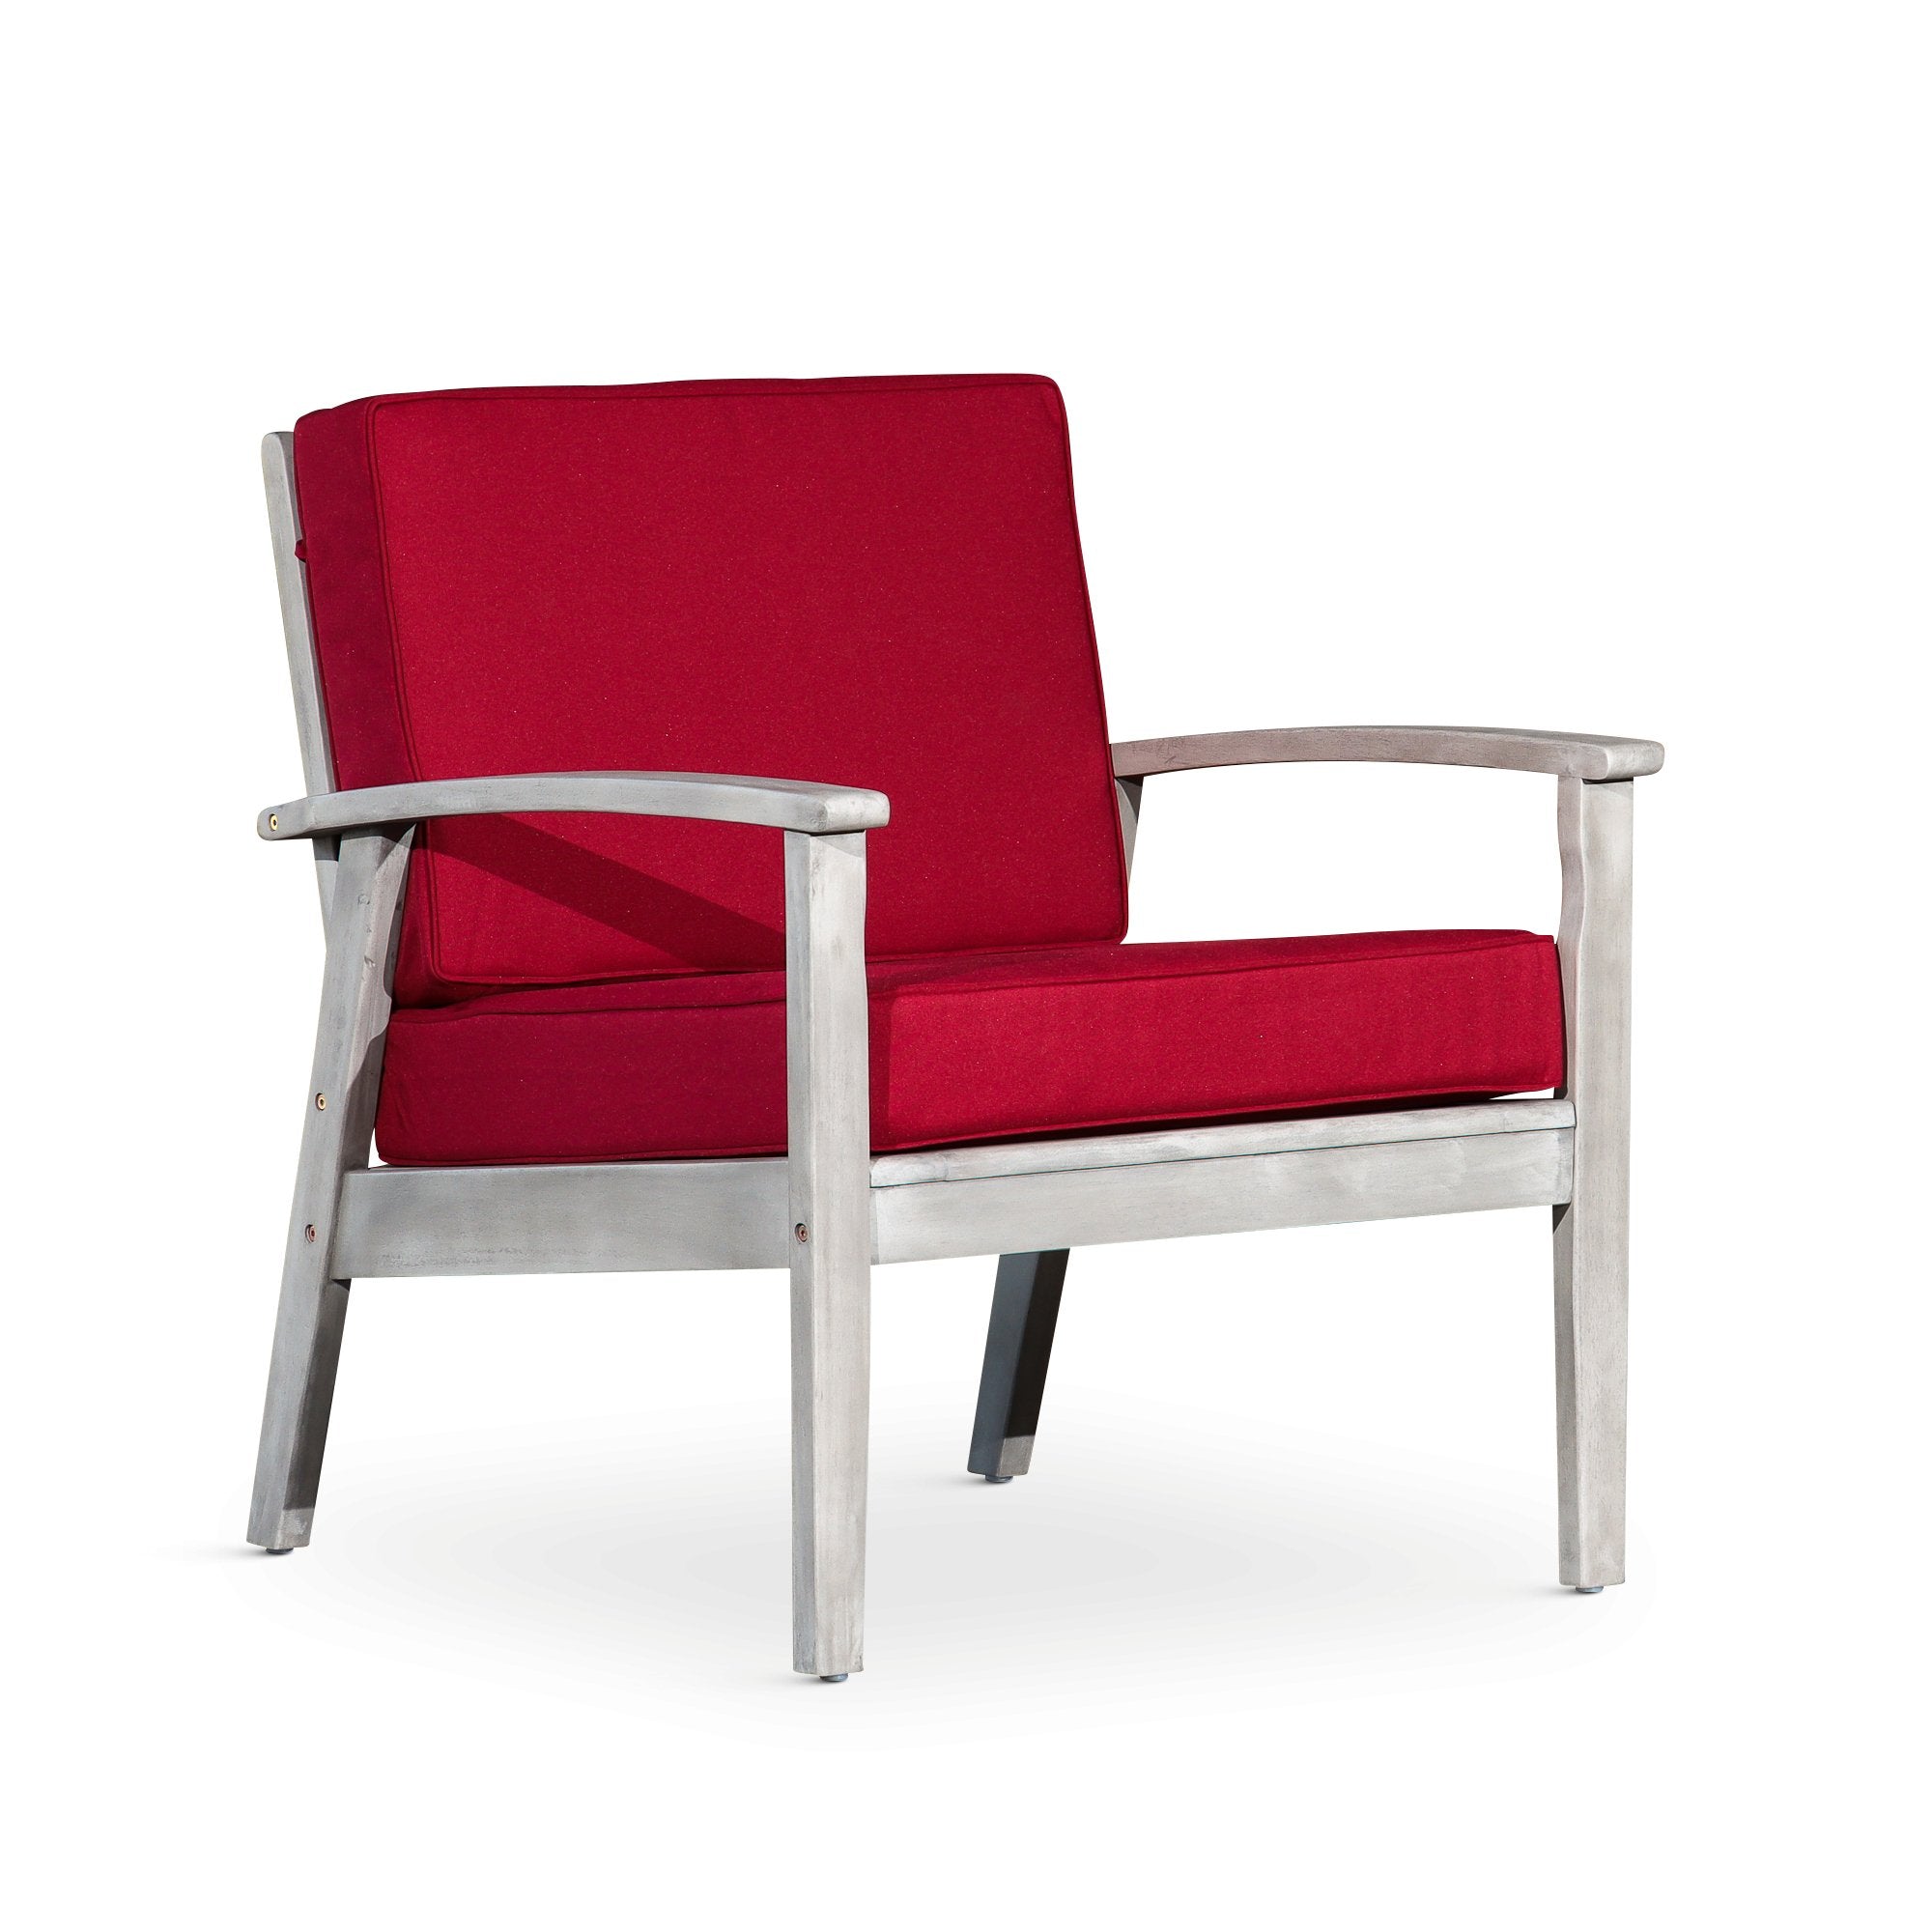 Deep-Seat-Outdoor-Chair-Silver-Gray-Finish,-Burgundy-Cushion-Outdoor-Chairs